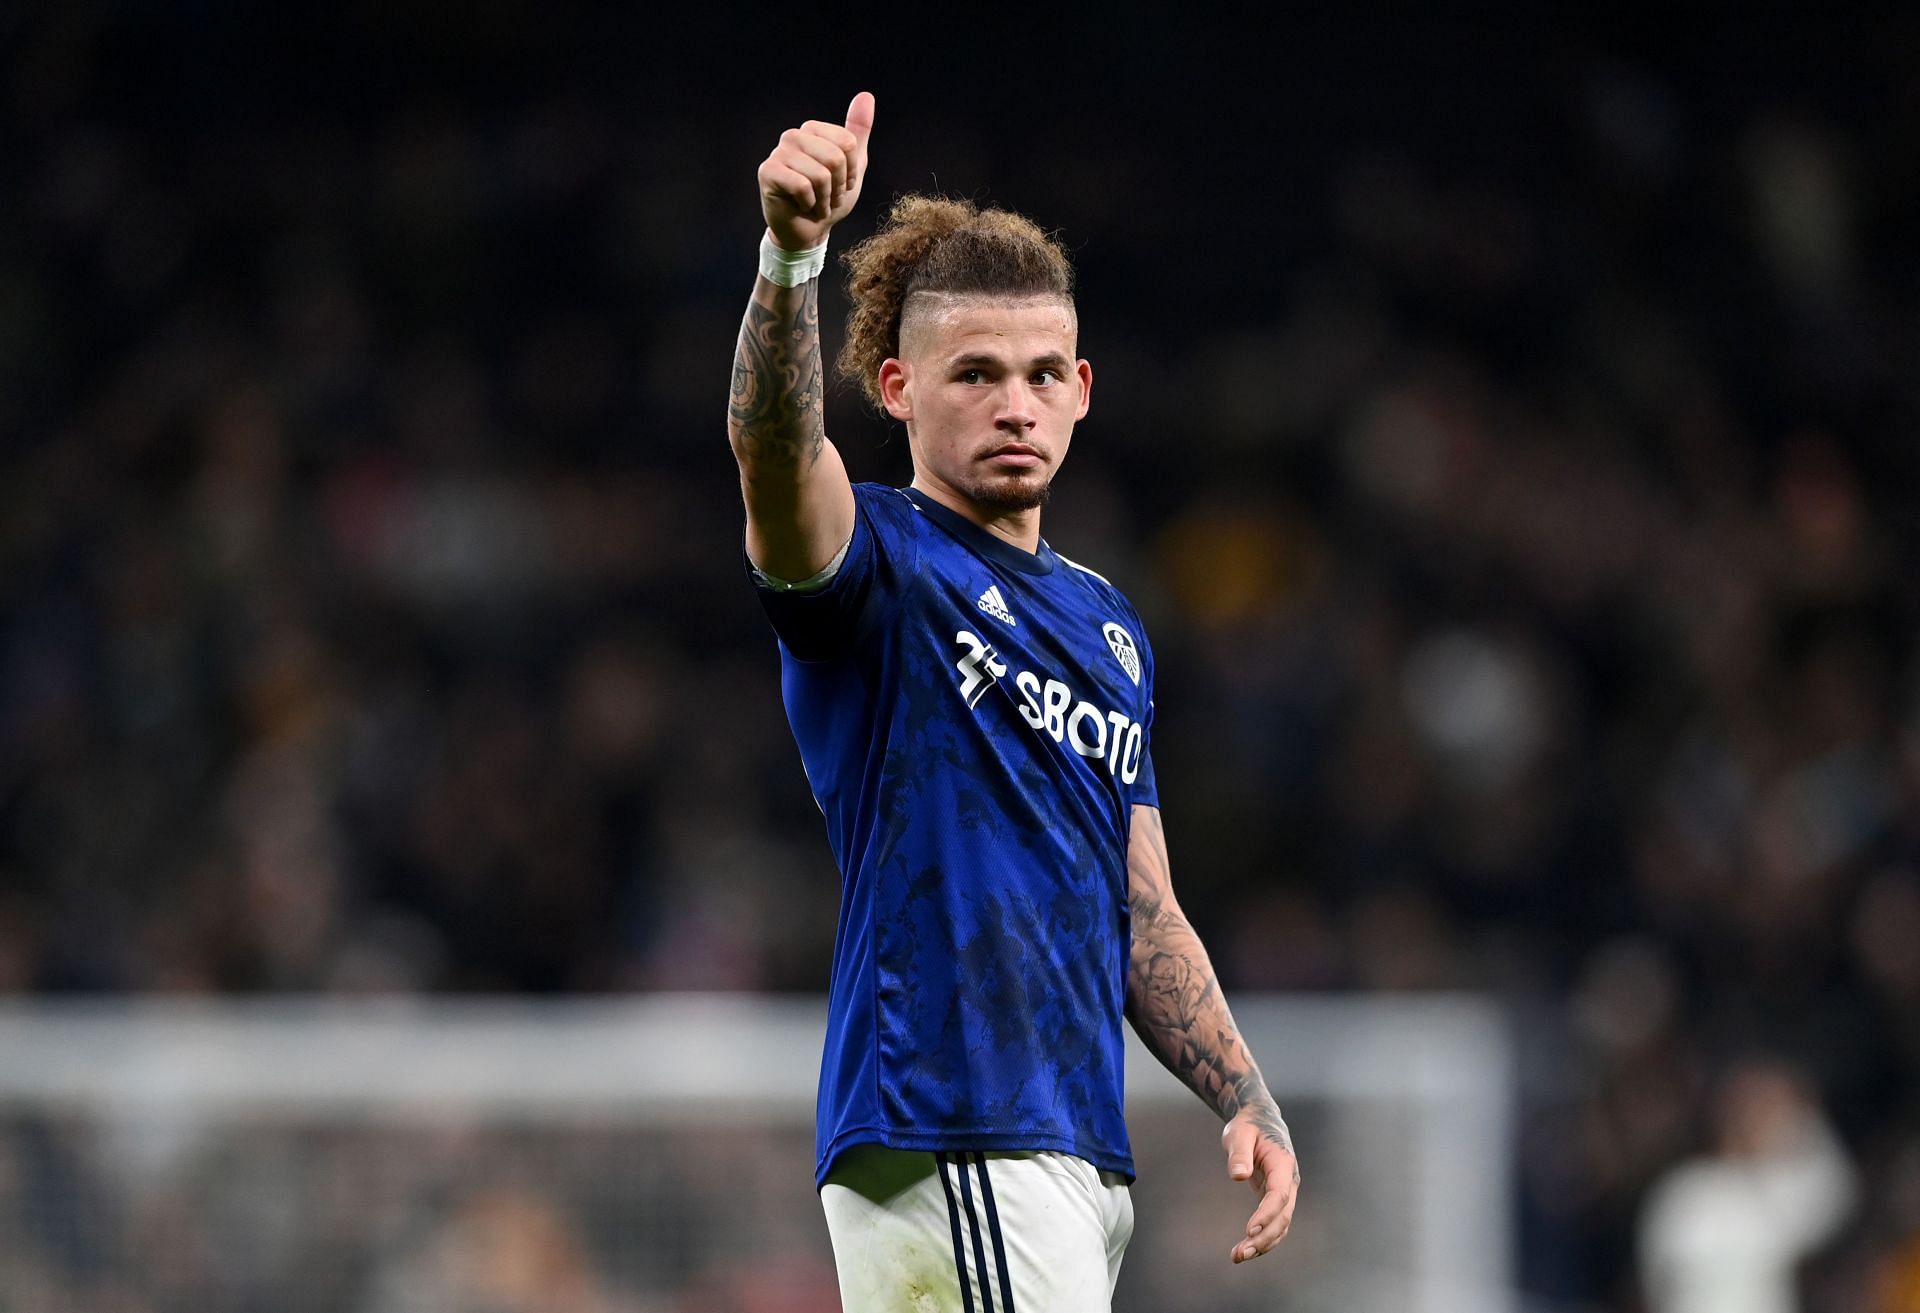 Arsenal are keeping a close eye on Kalvin Phillips